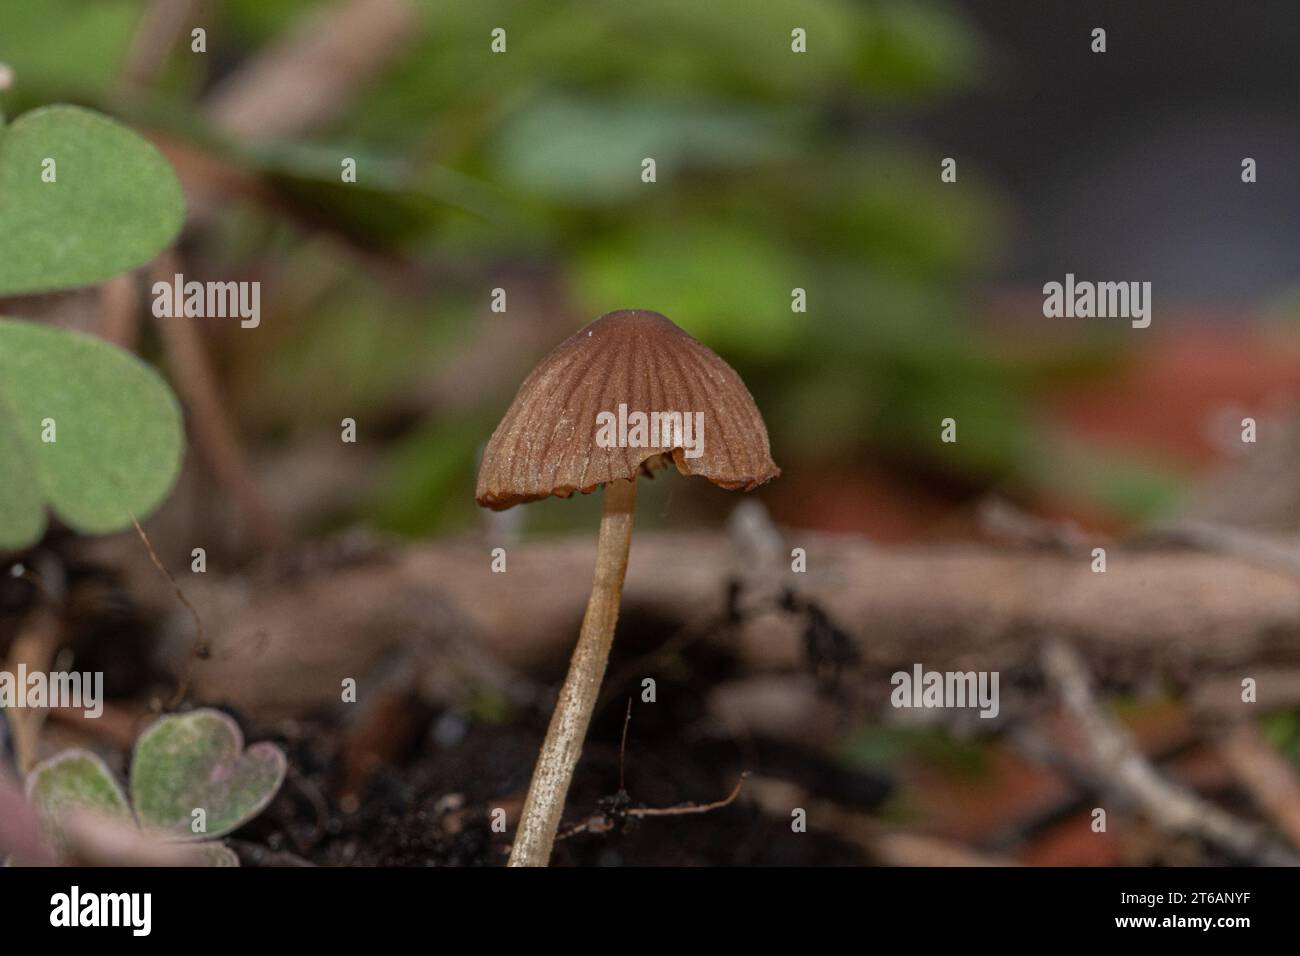 Small mushroom in the foreground in the undergrowth Stock Photo